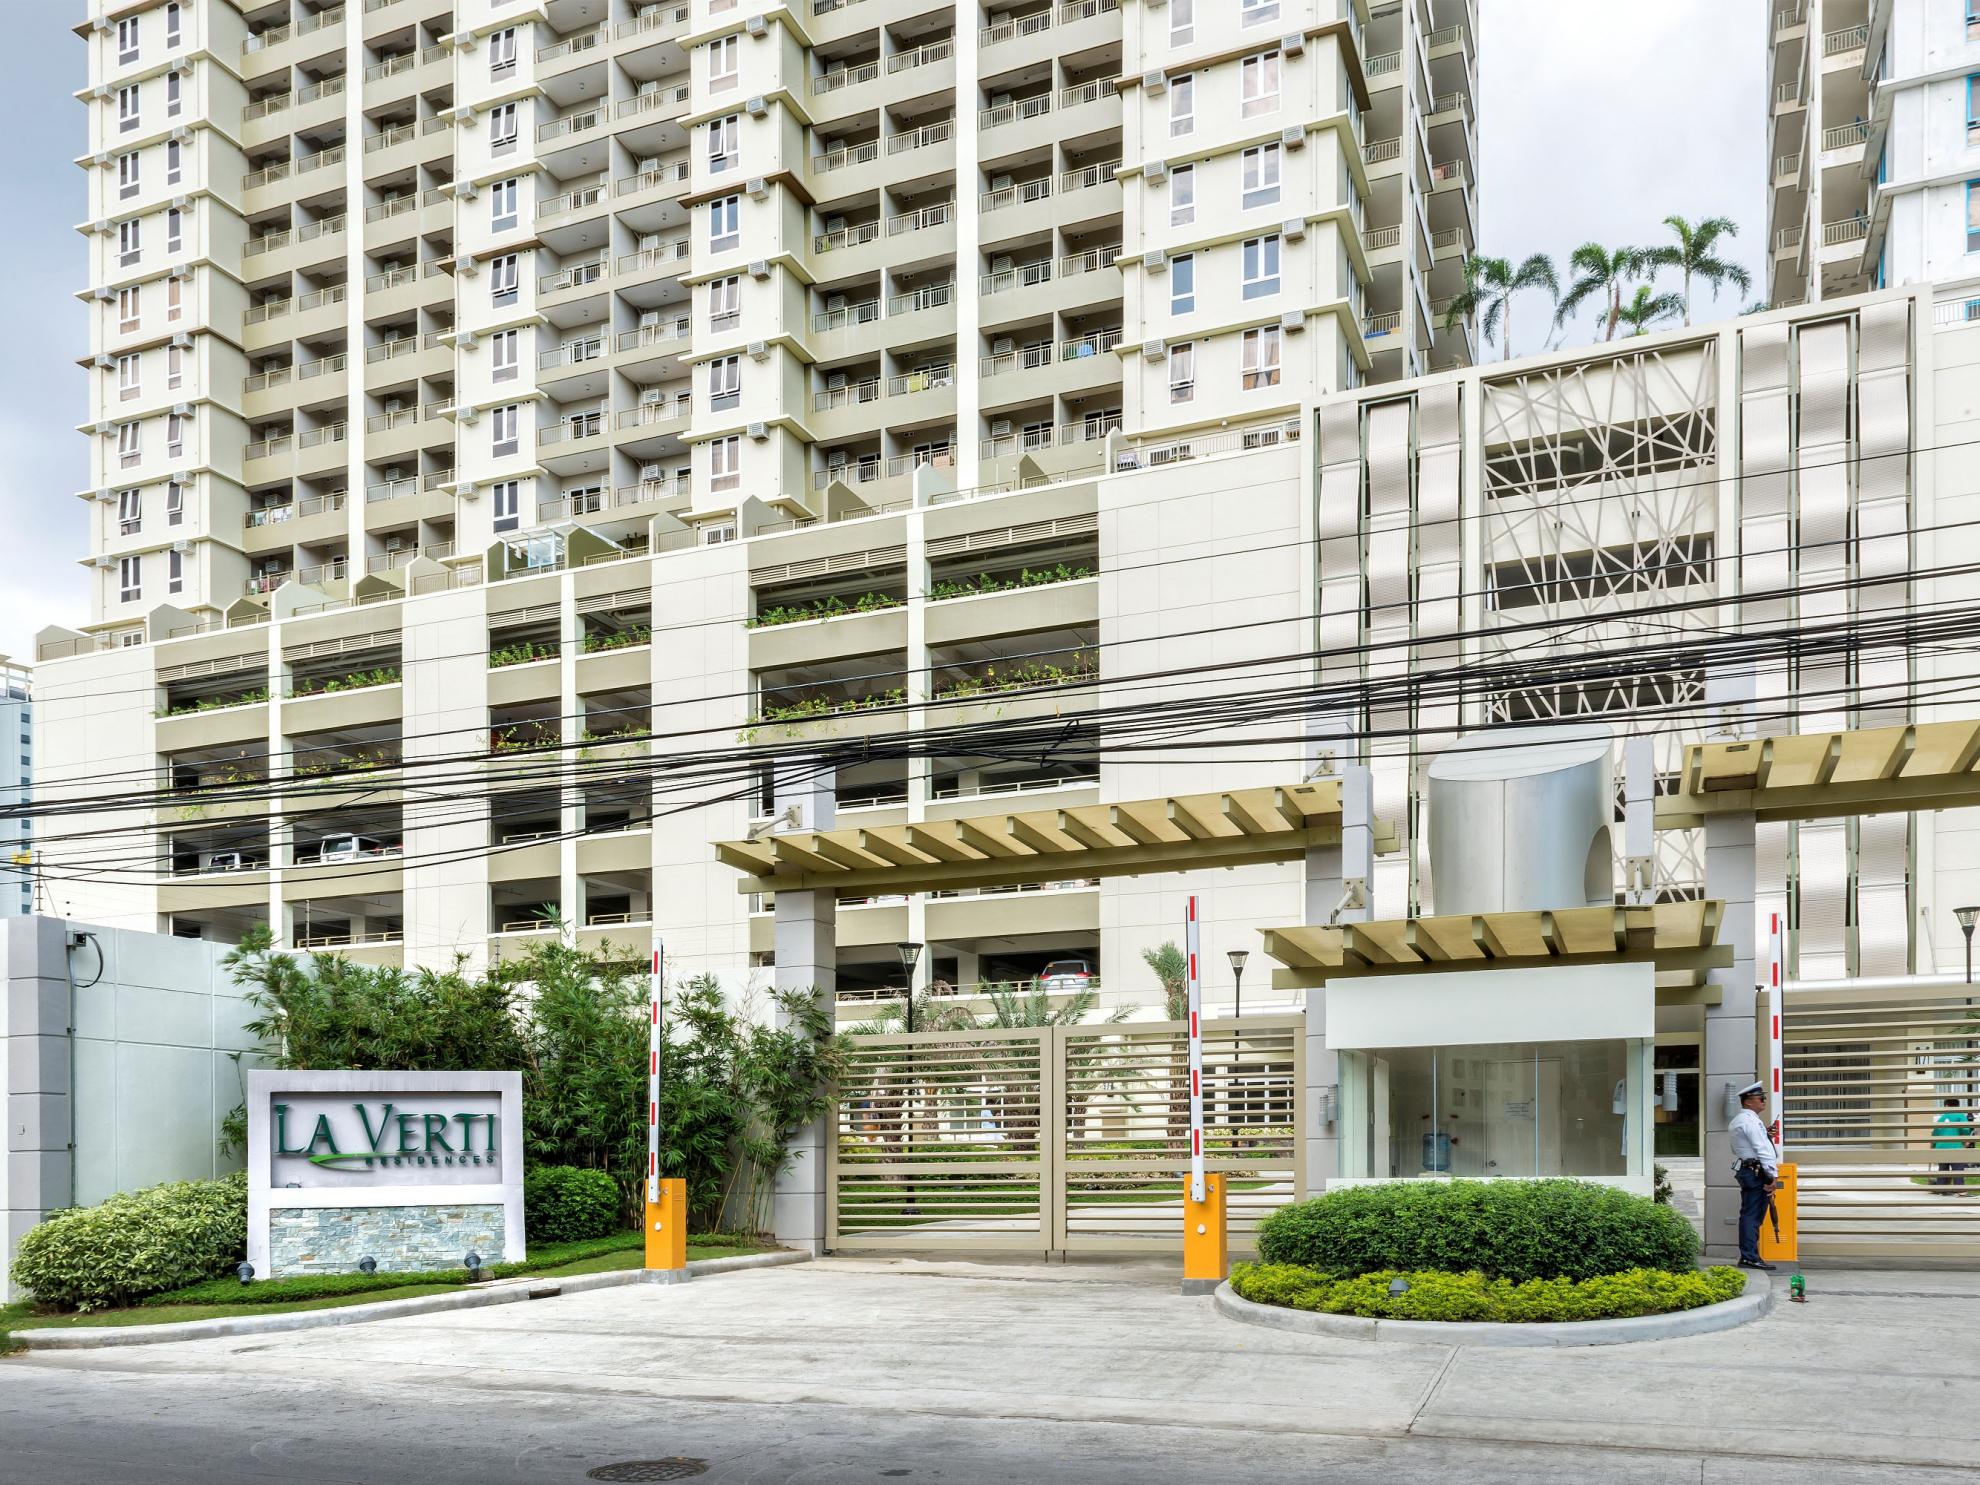 Photo shows DMCI Homes’ first project in Pasay City, two-tower development La Verti Residences.